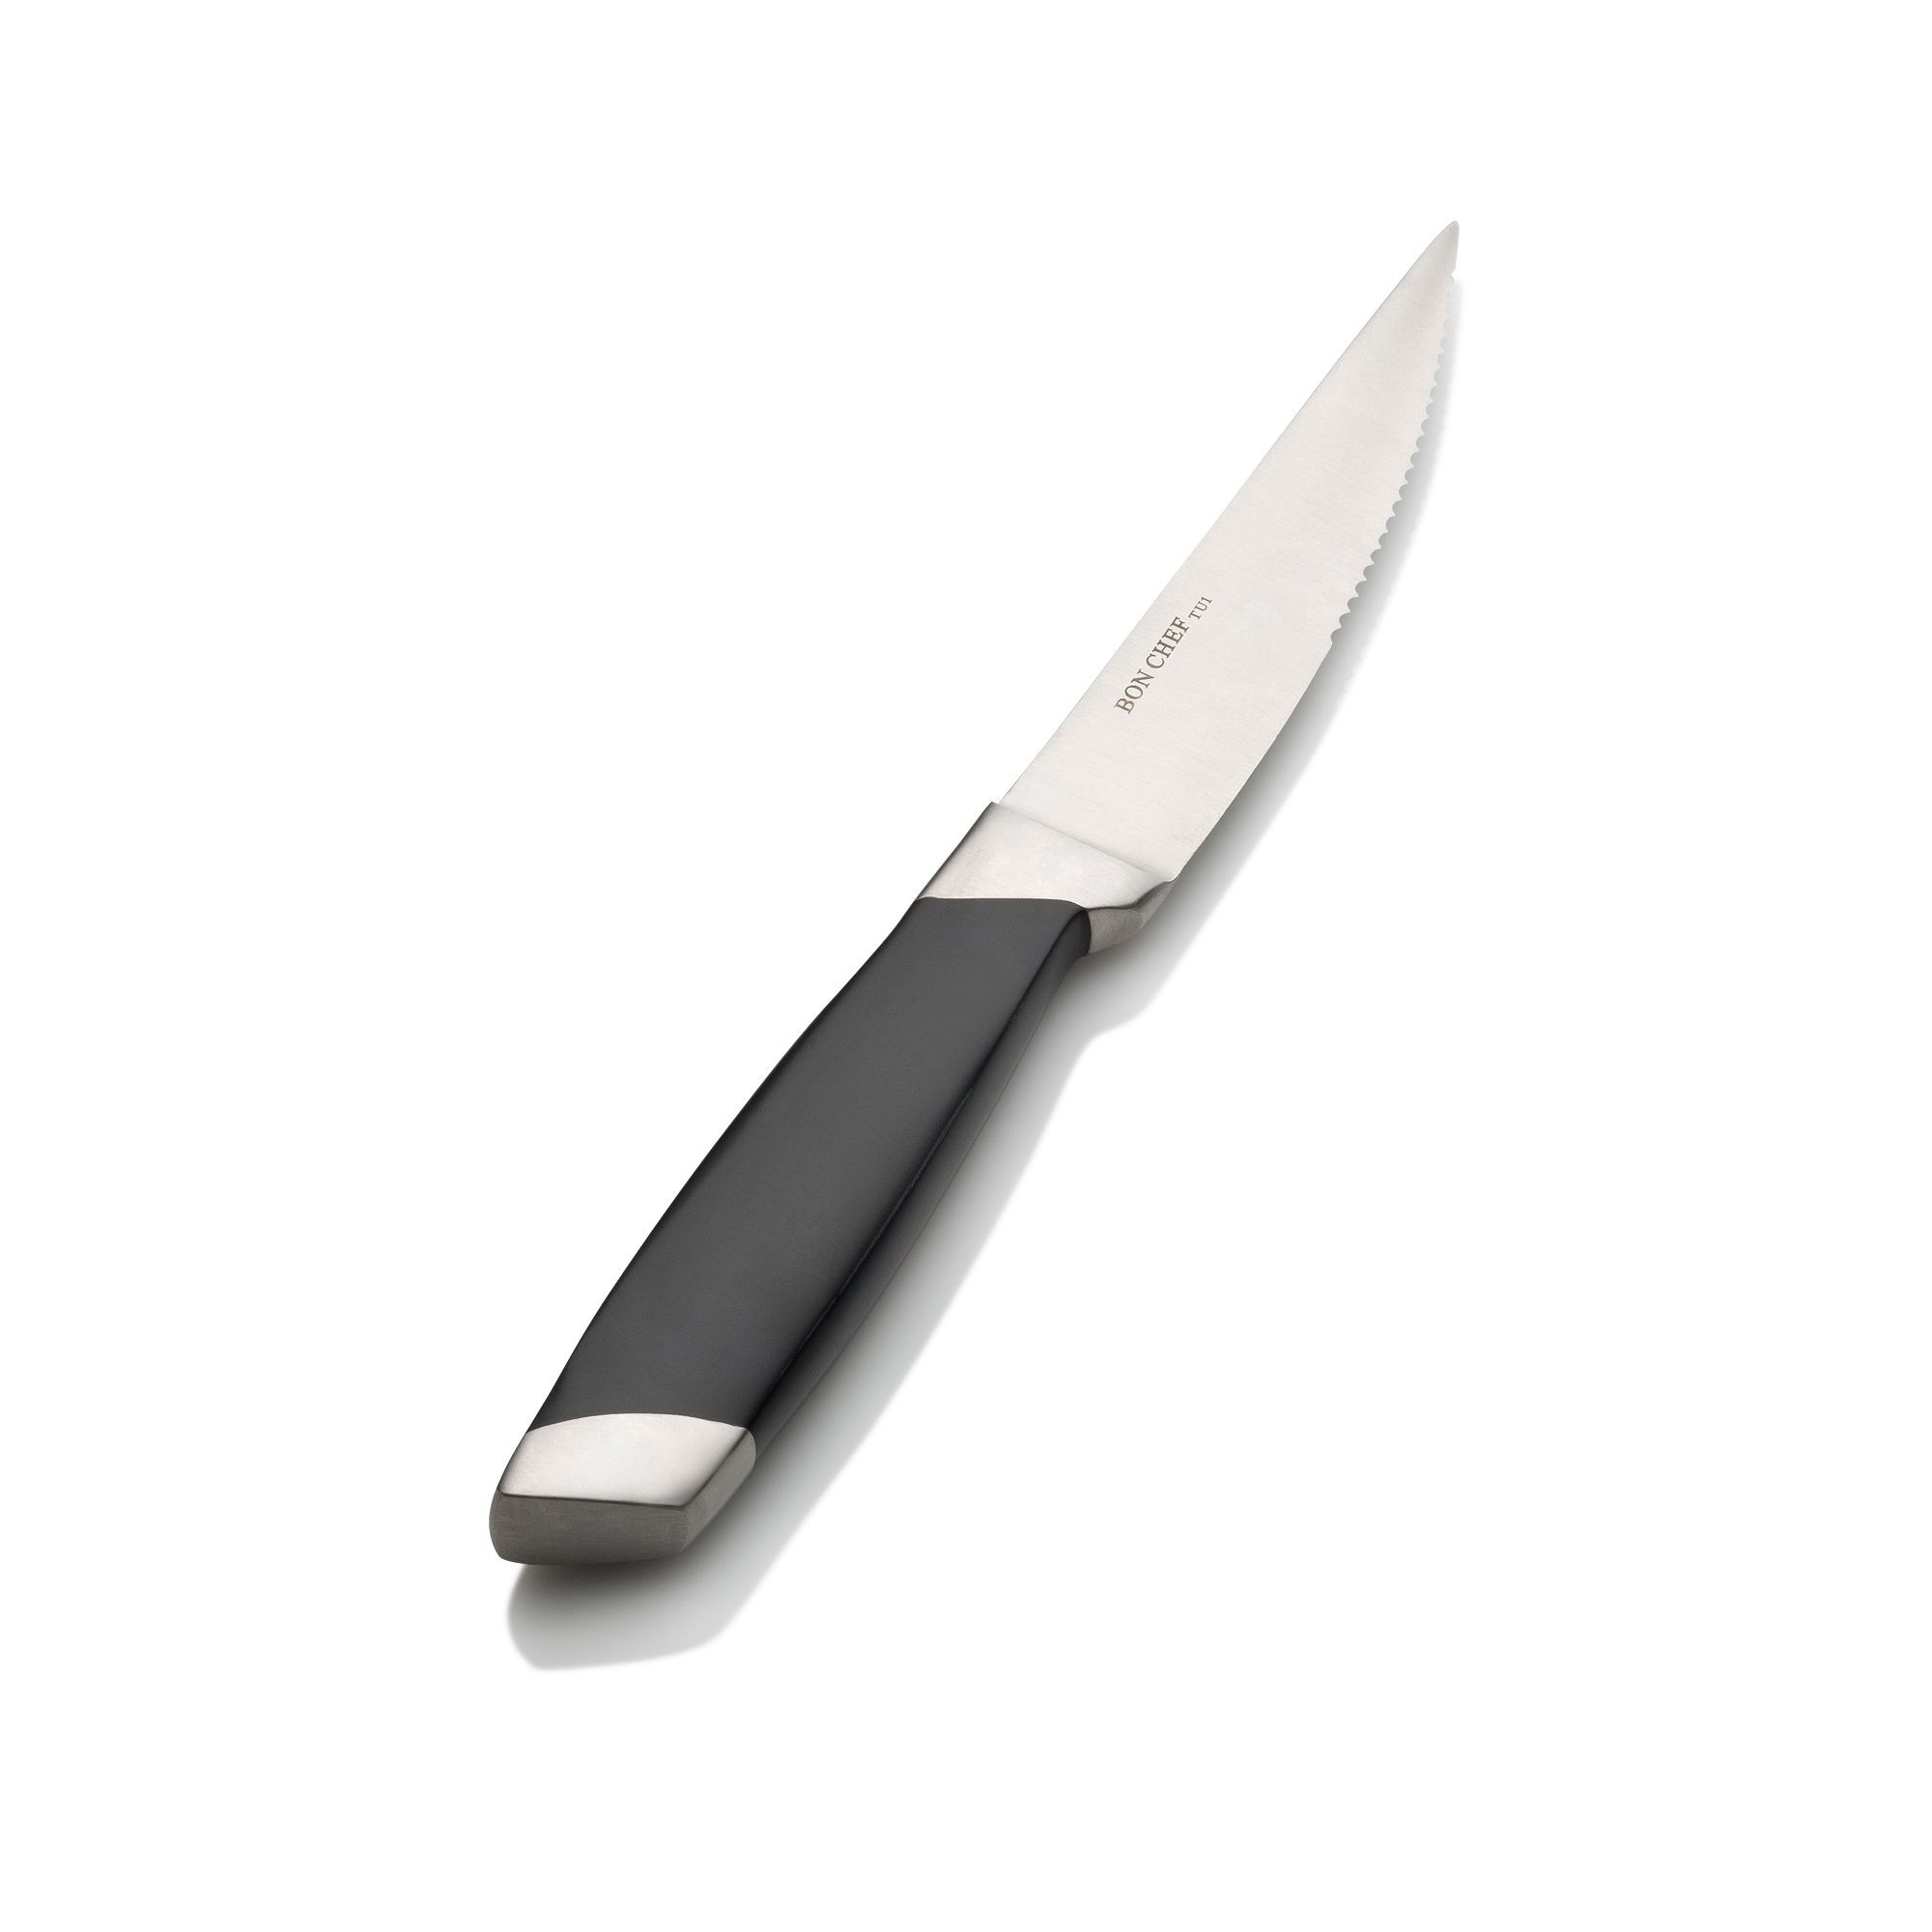 Bon Chef S936 Gaucho Stainless Steel Steak Knife with Pointed Tip Blade 10